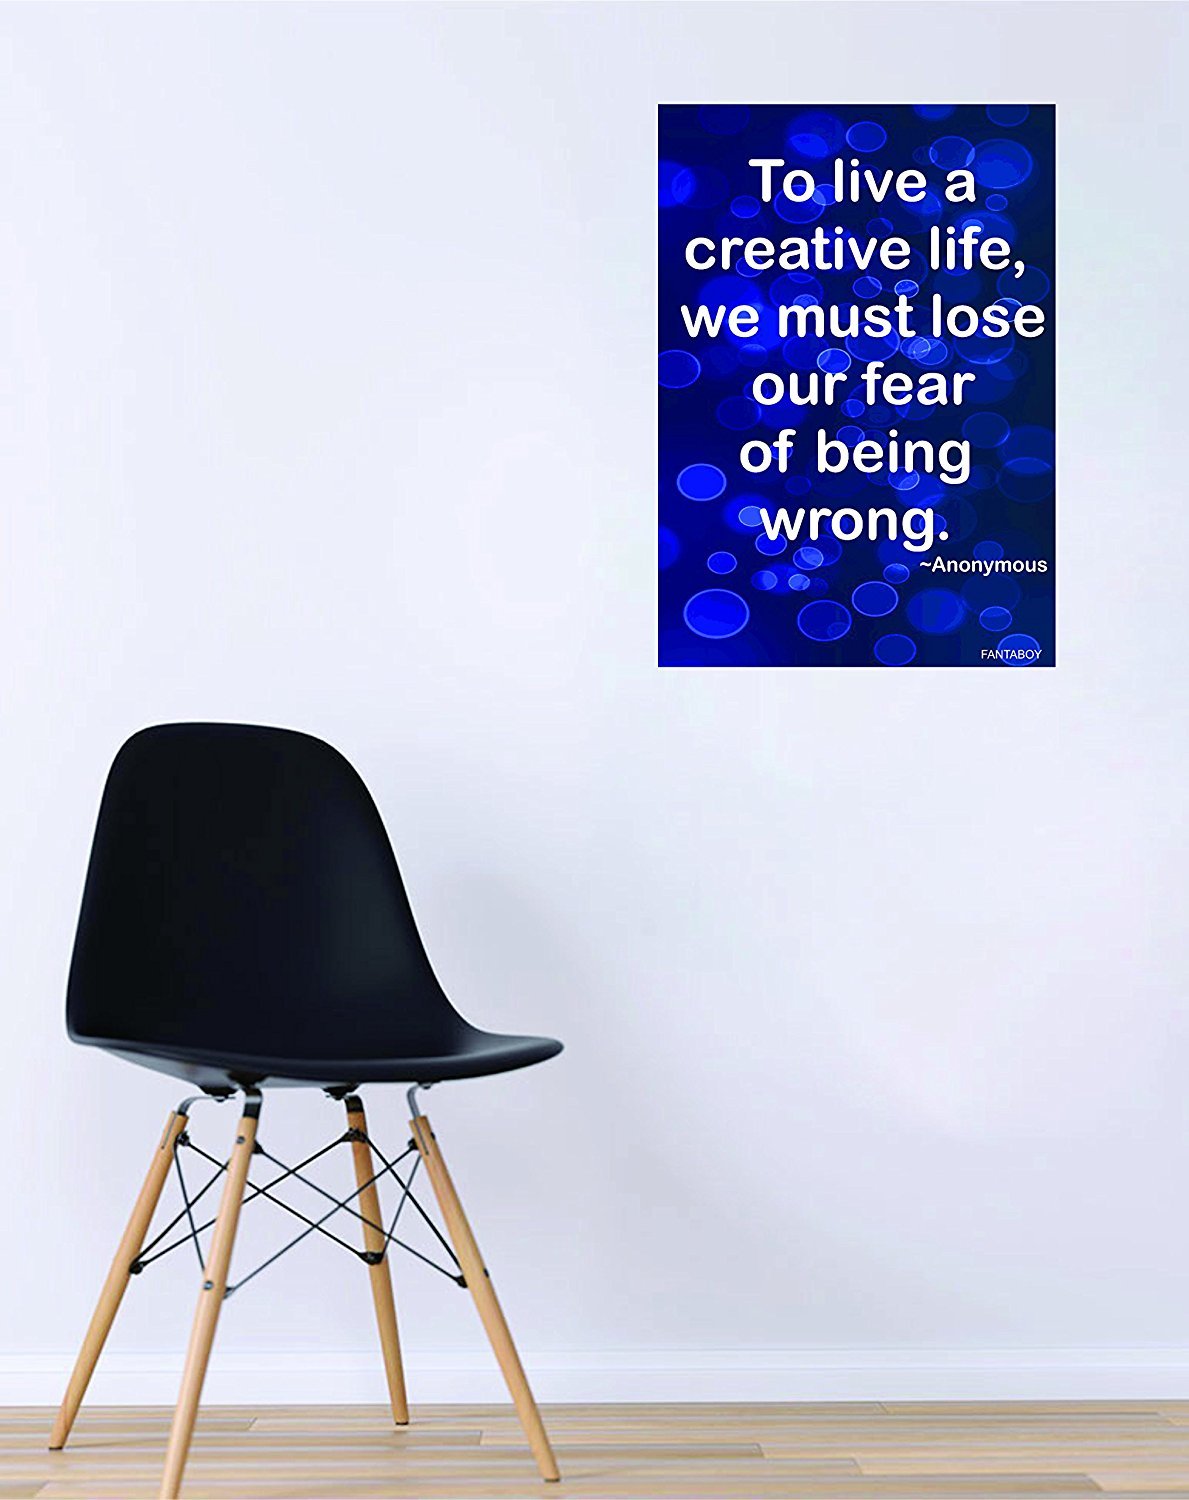 Fantaboy  "To live a Creative Life" Motivational Printed Poster (12 x 18)